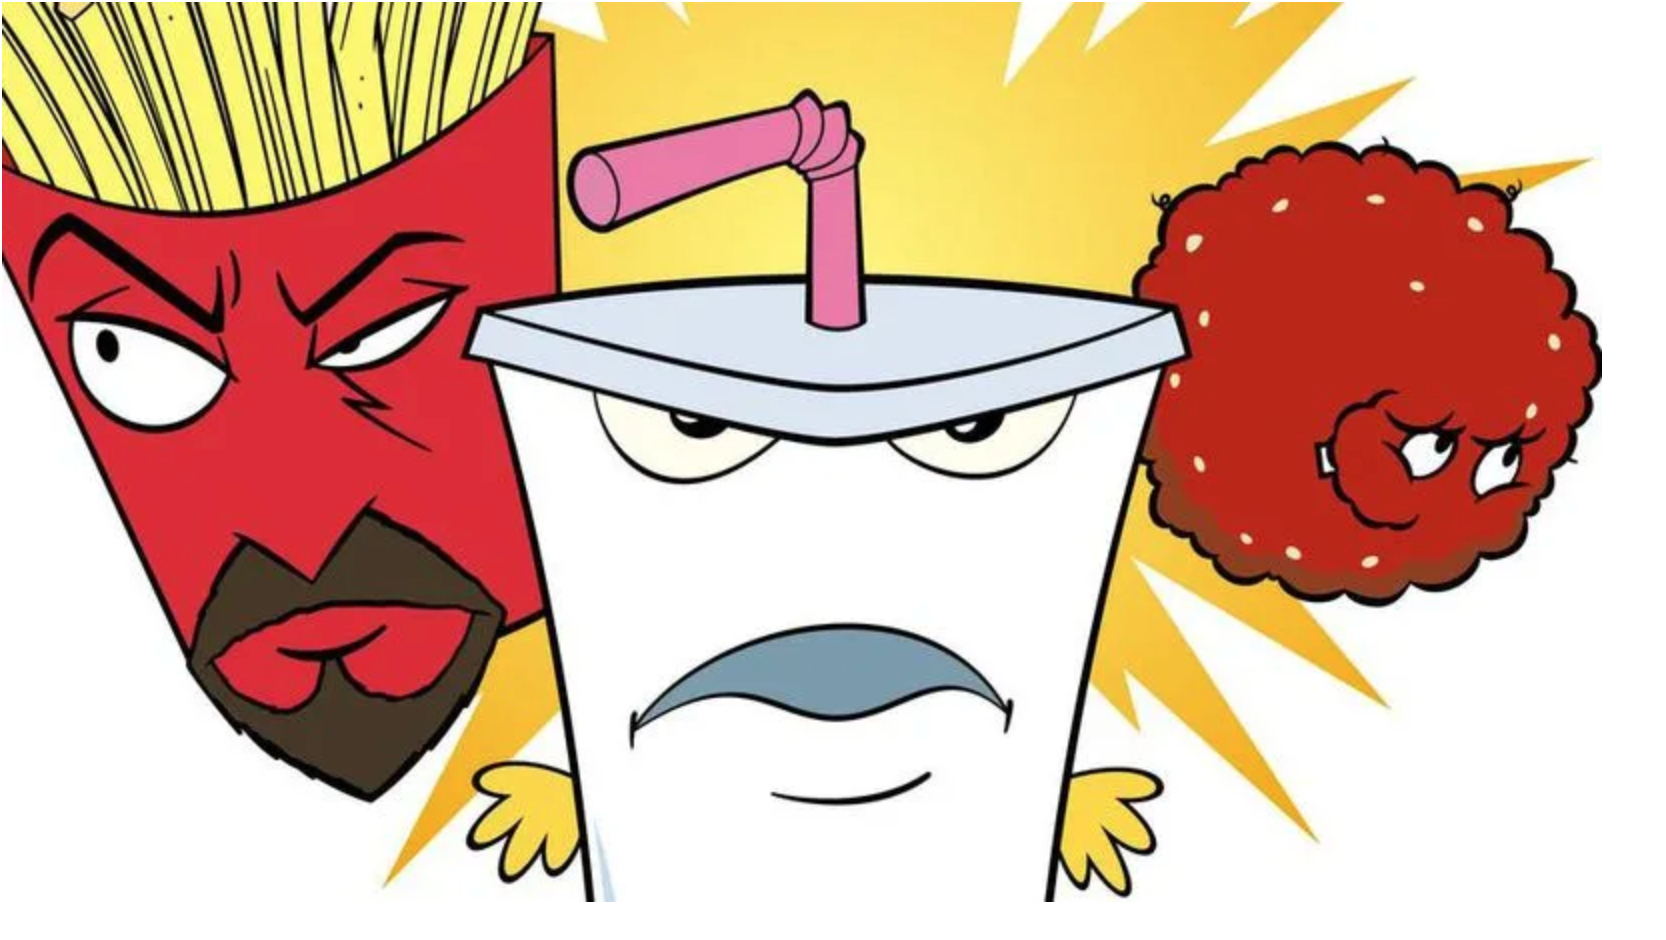 An image from Aquateen Hungerforce cartoon featuring an anthropomorphic carton of French fries, a milkshake, and a meatball 